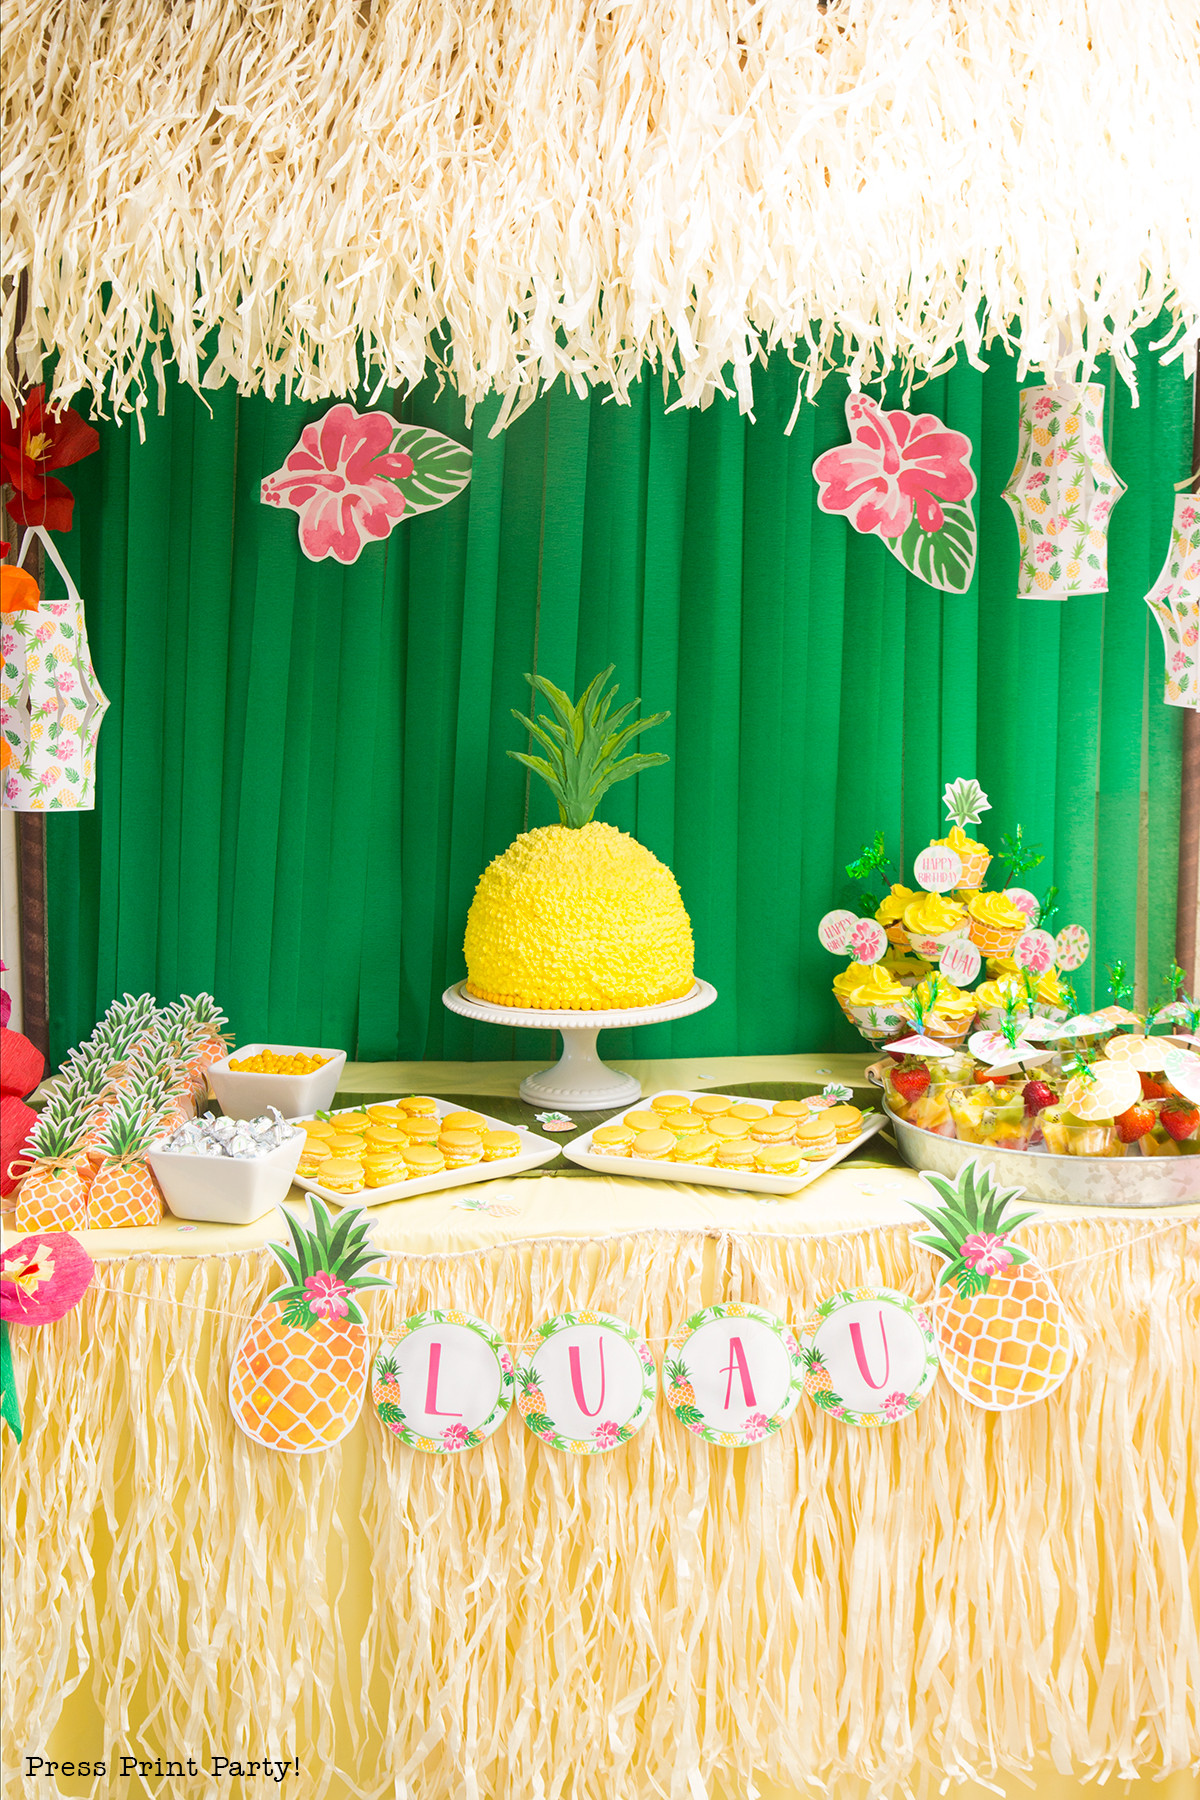 Decoration Ideas For Birthday Party
 Sweet "Party Like a Pineapple " Birthday Party Luau